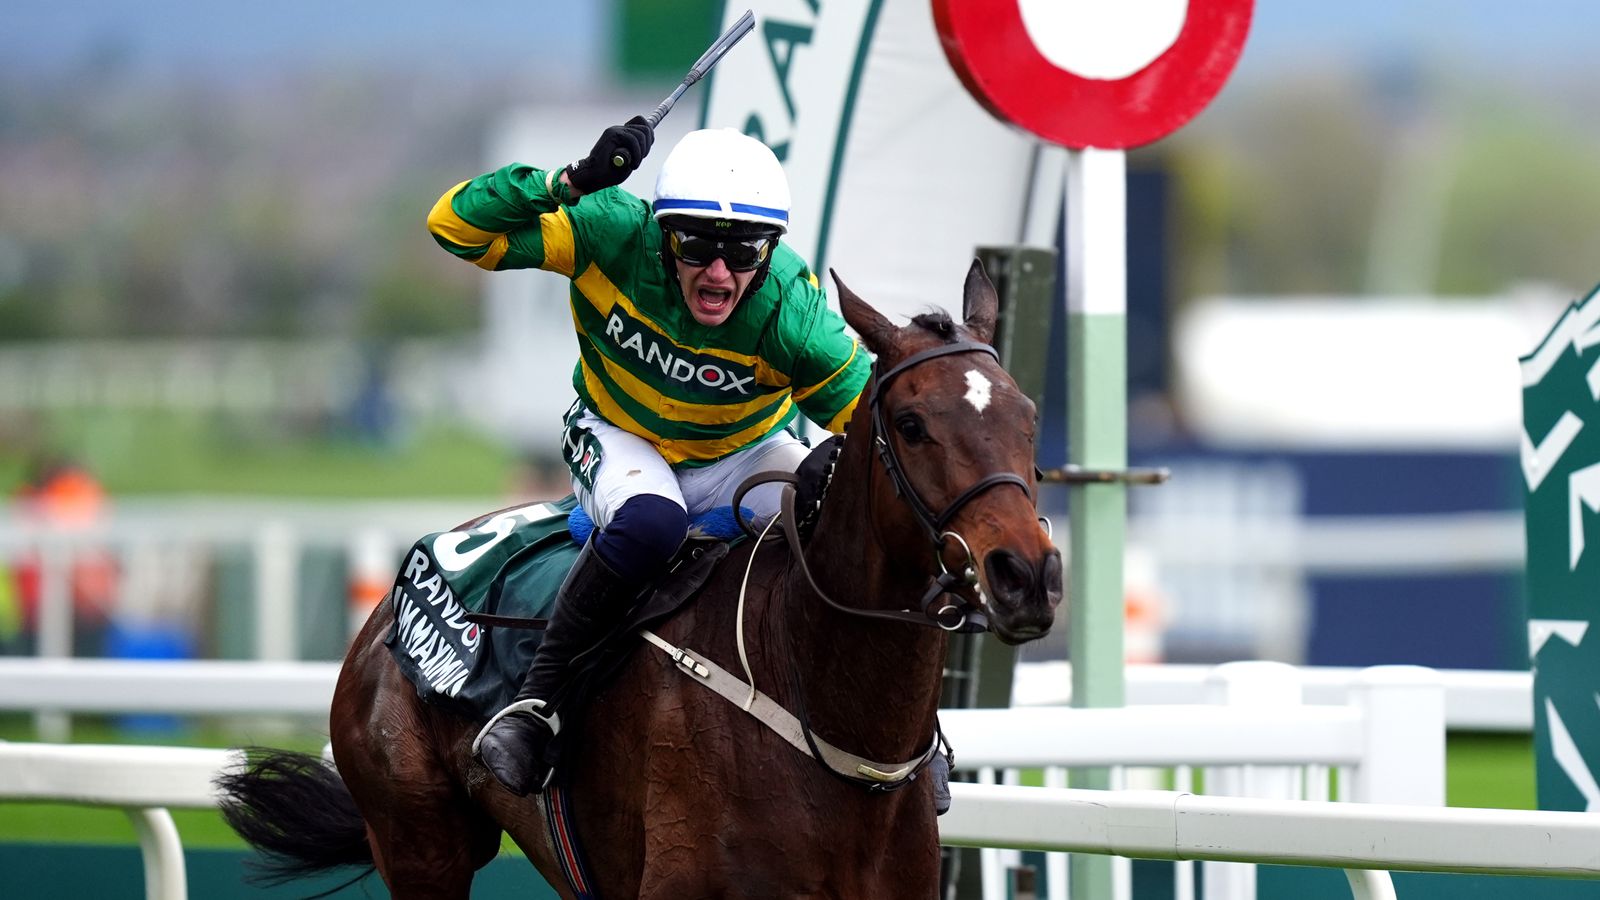 Grand National I Am Maximus powers to Aintree victory for Paul Townend